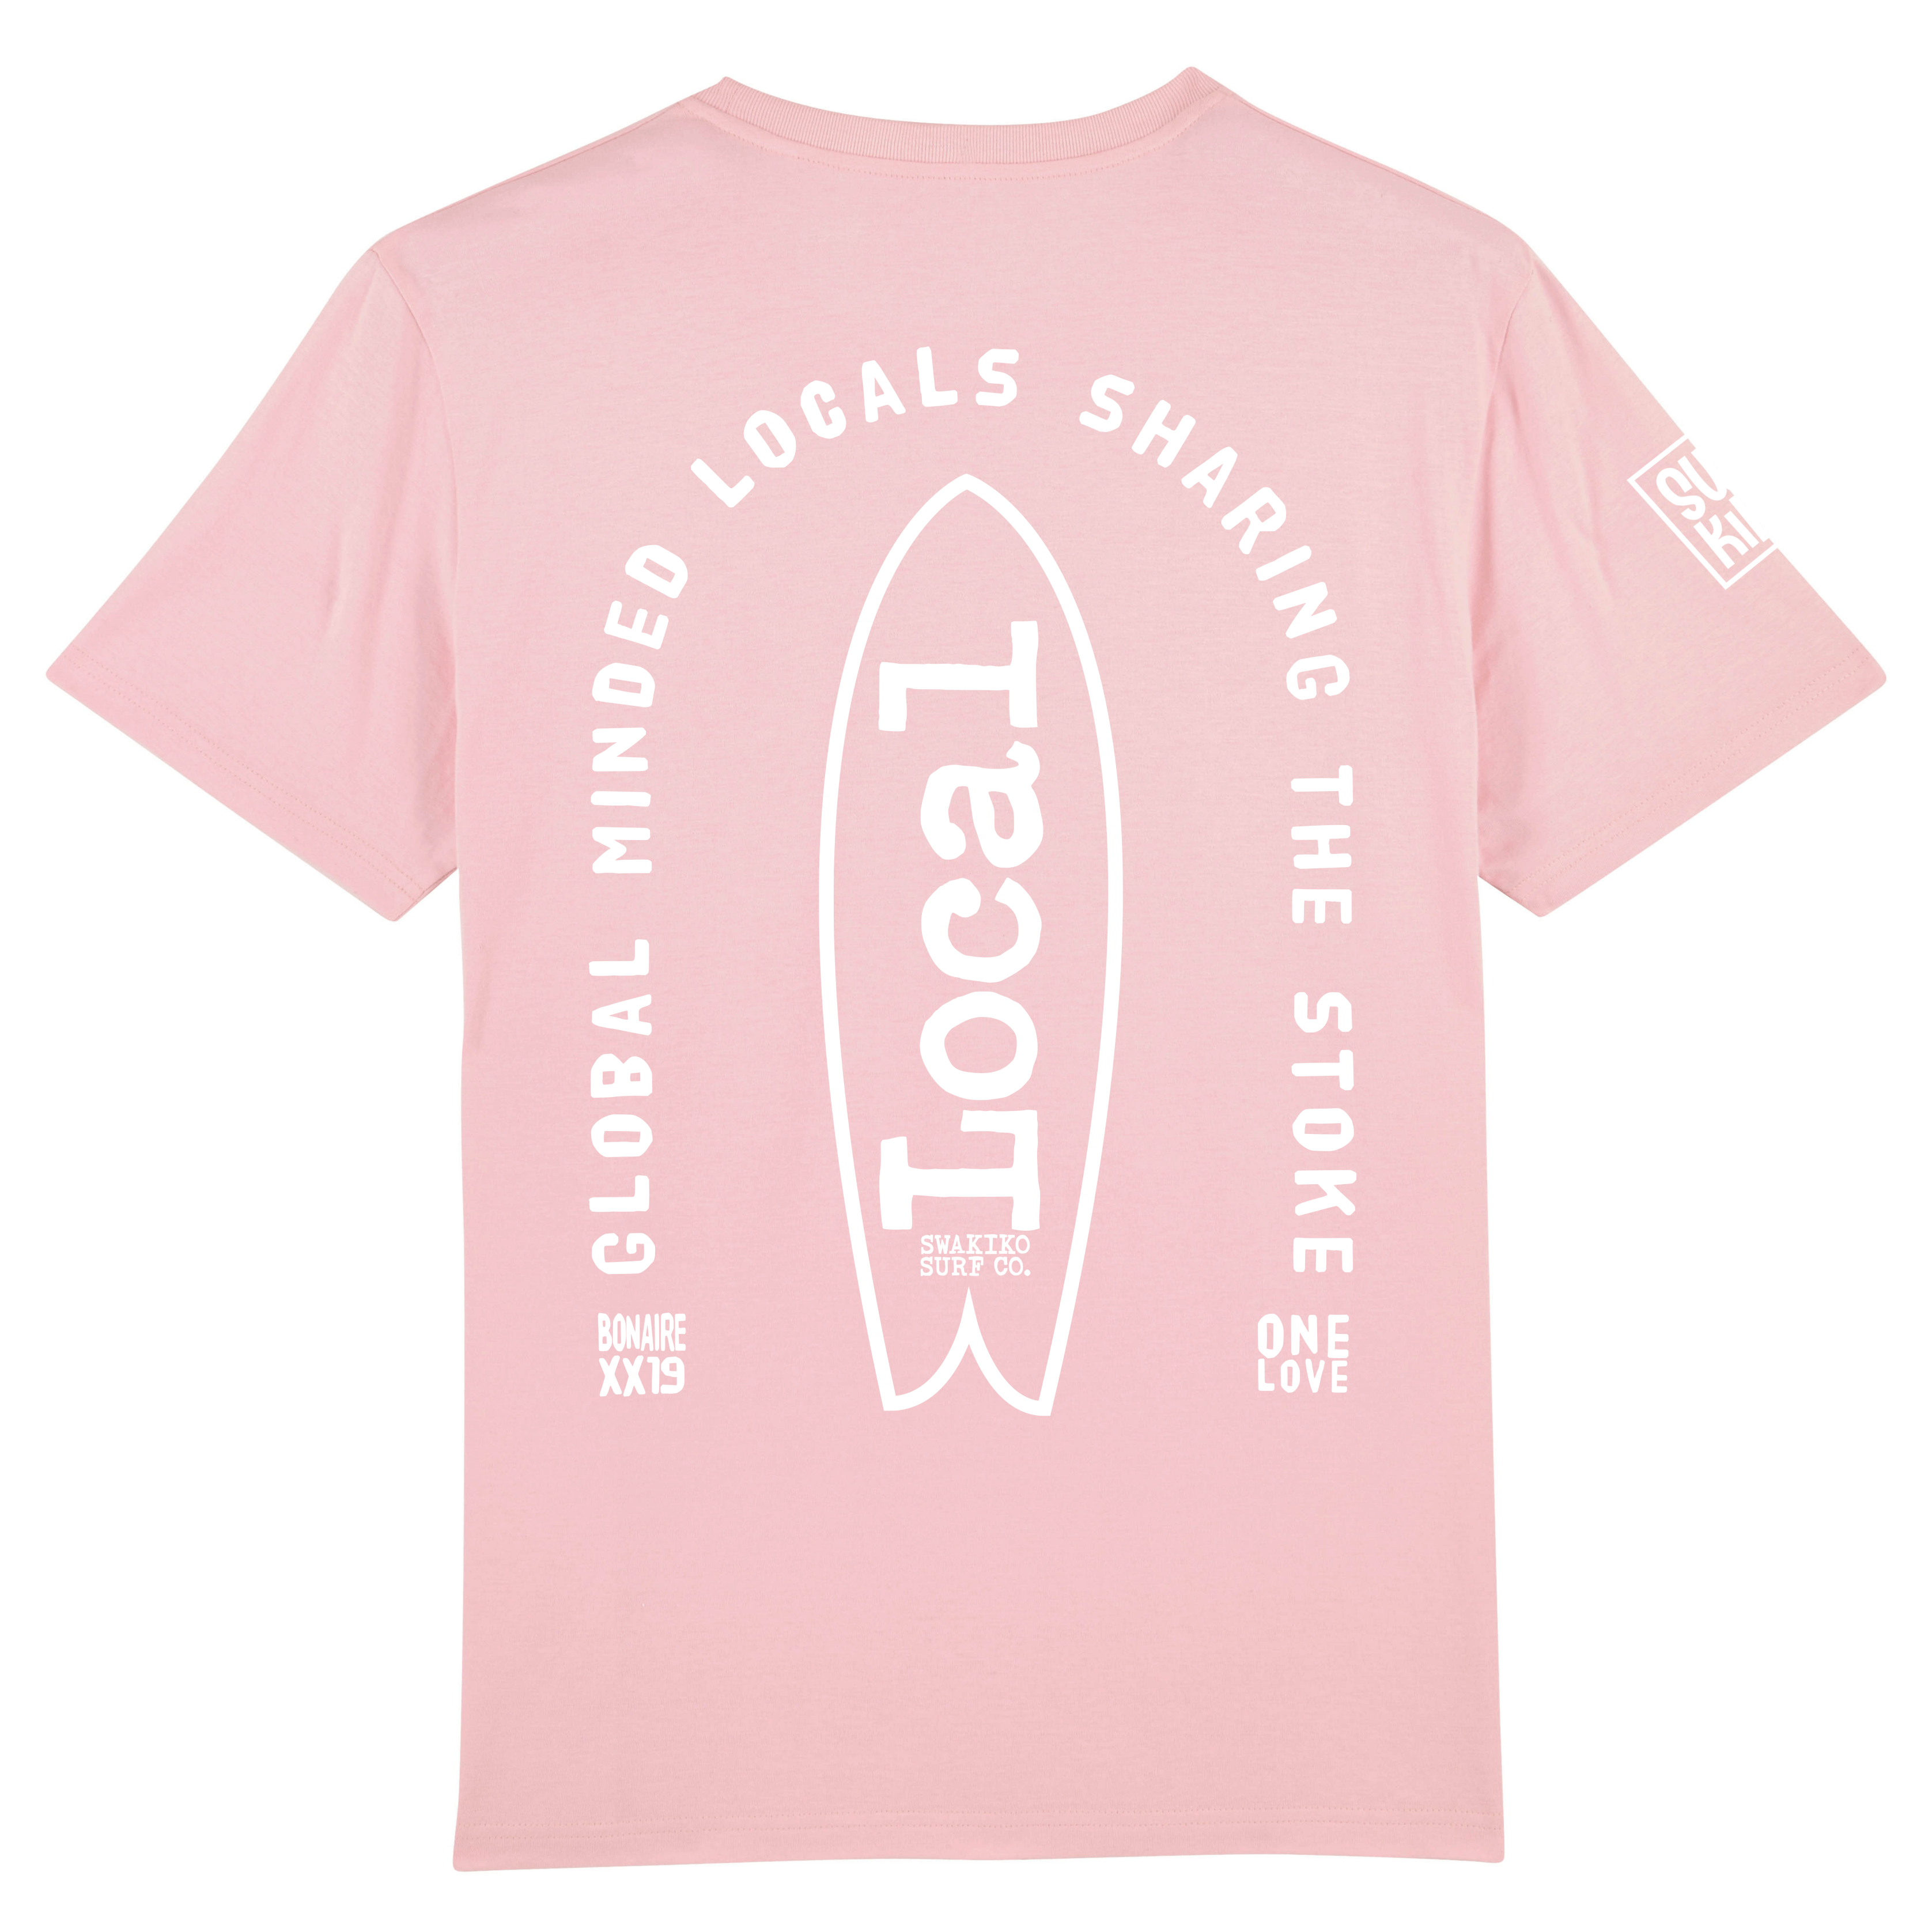 Stoked Locals T-shirt, pink